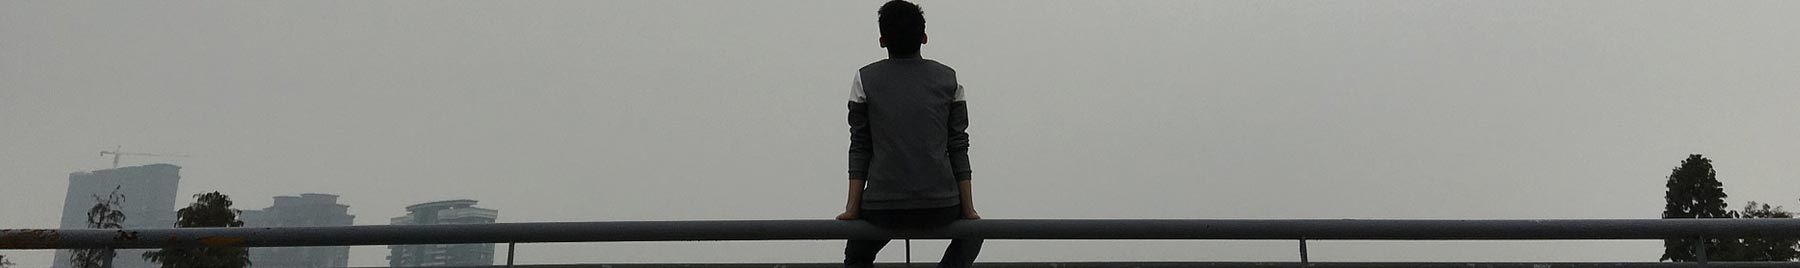 A lonely teenager sits on a bridge railing and looks at the rainy city